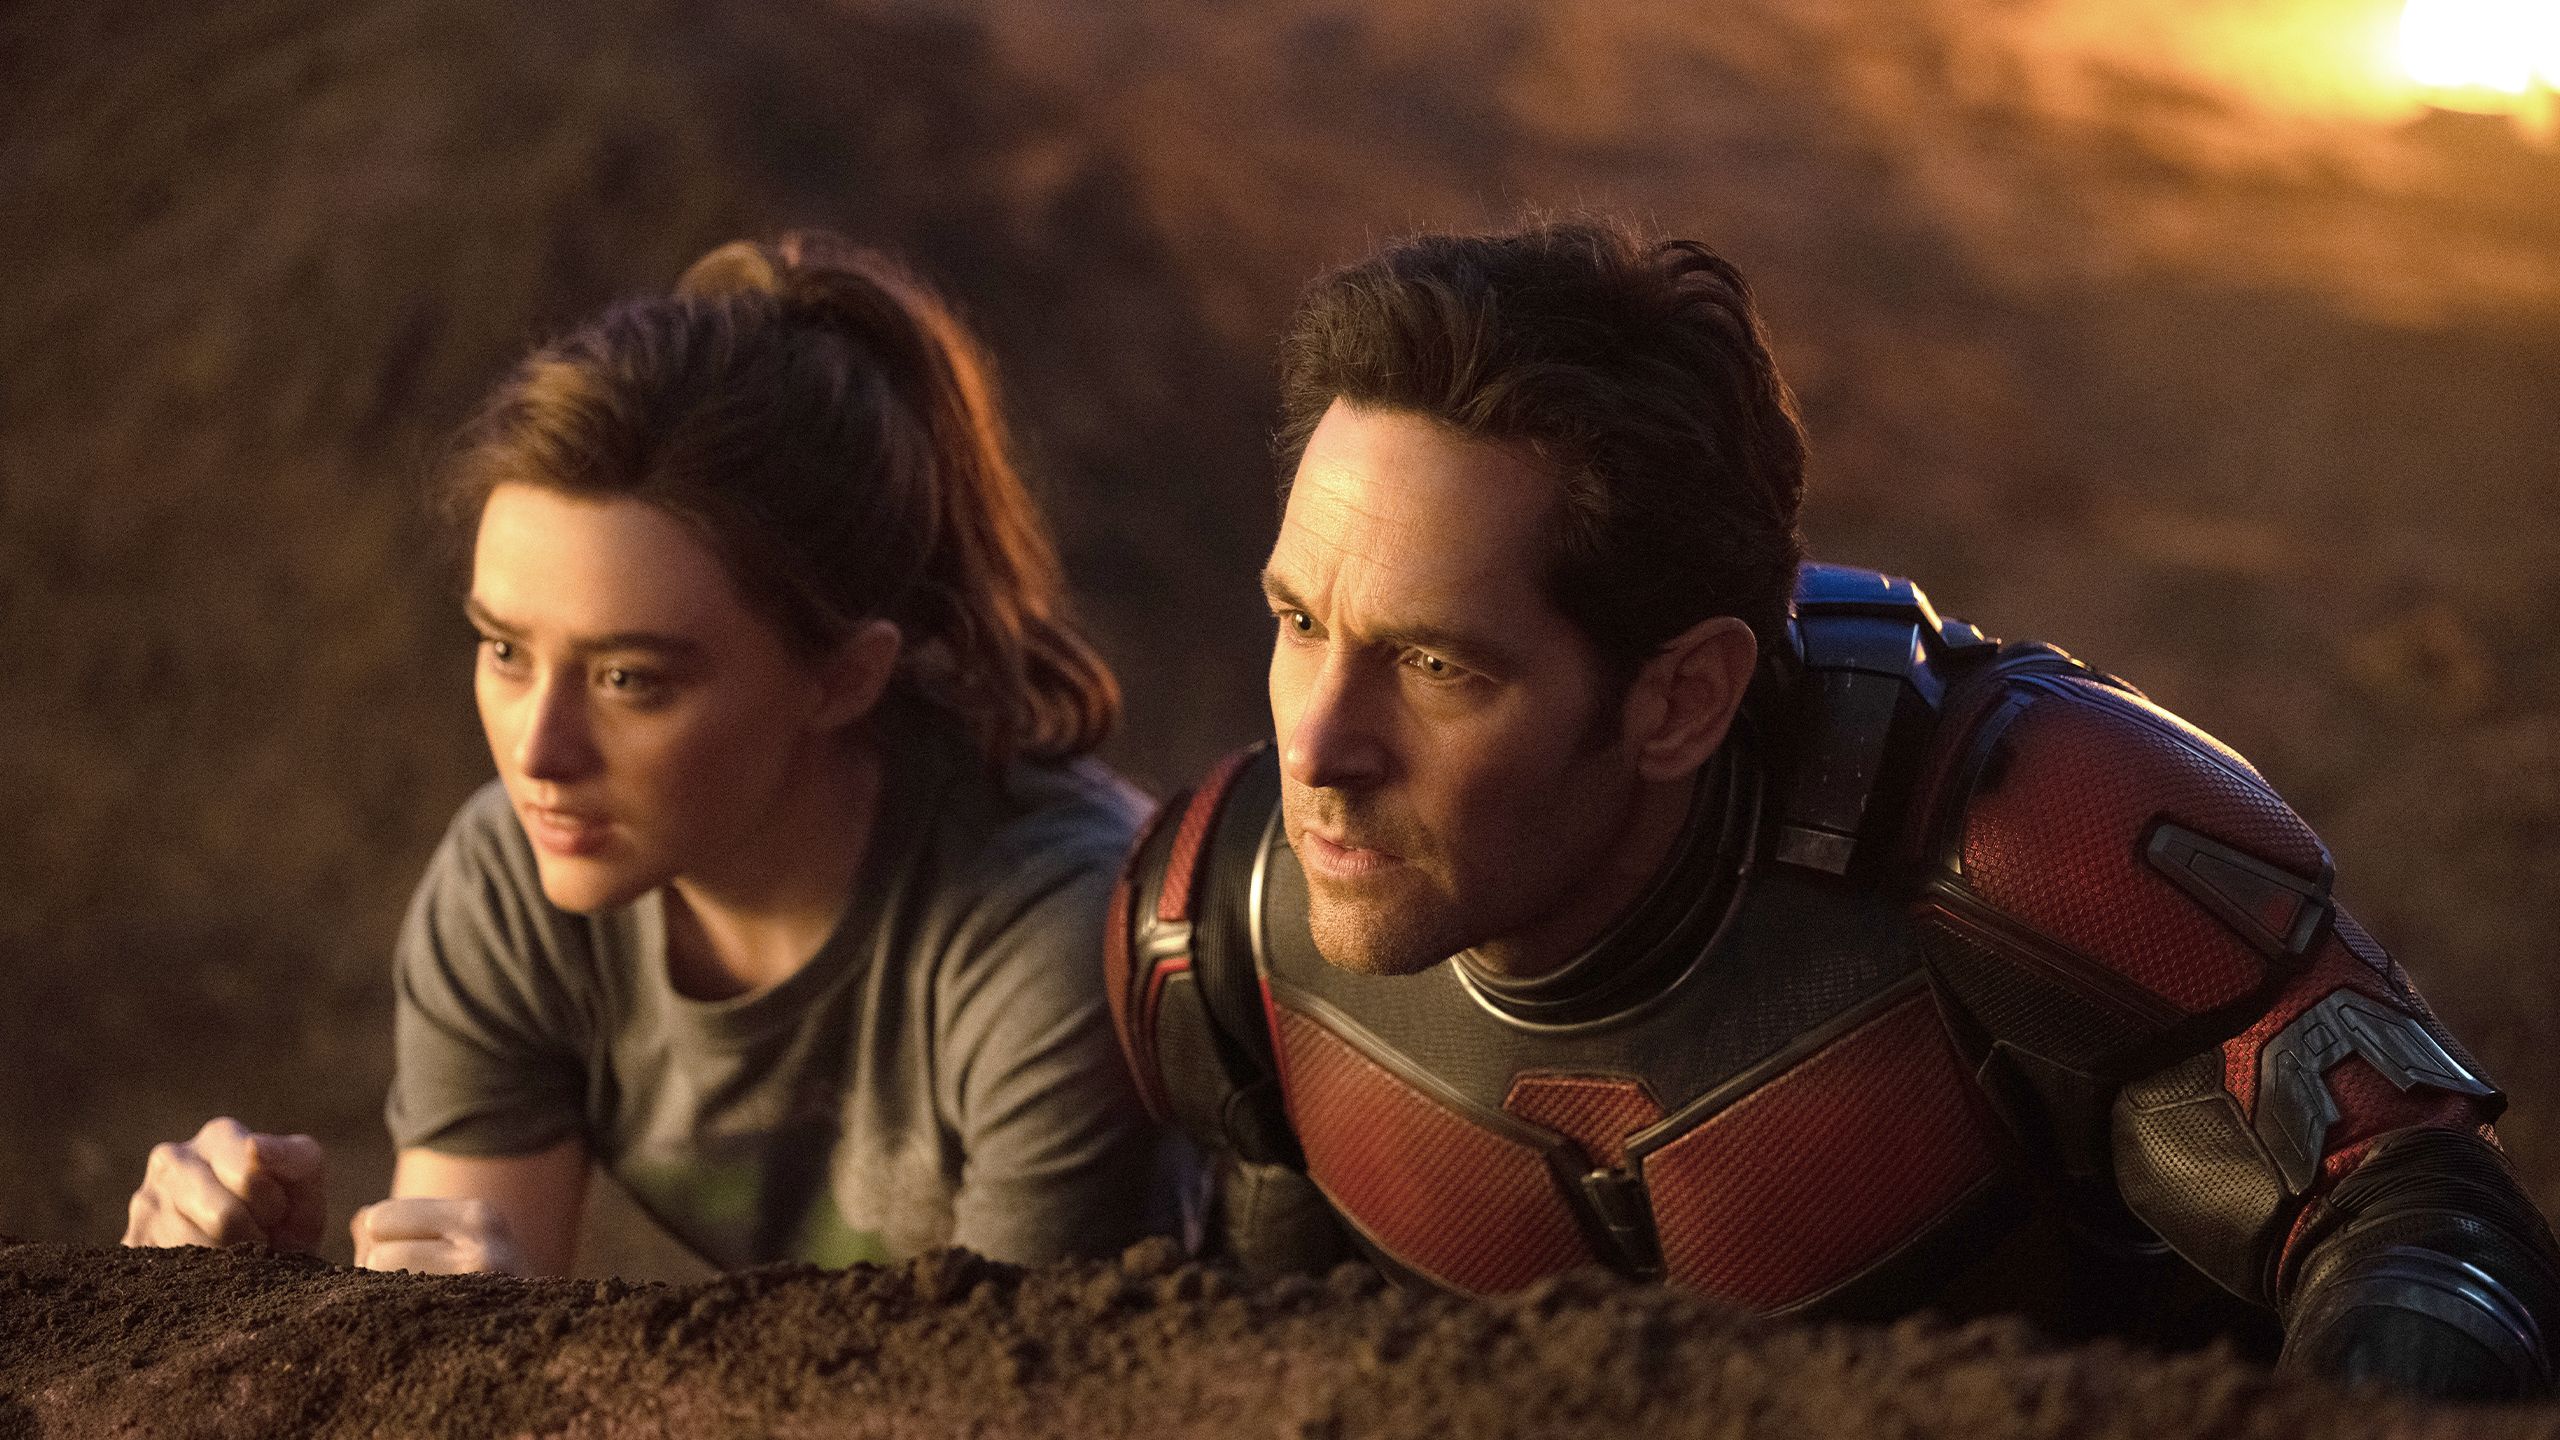 Ant-Man and The Wasp, Full Movie